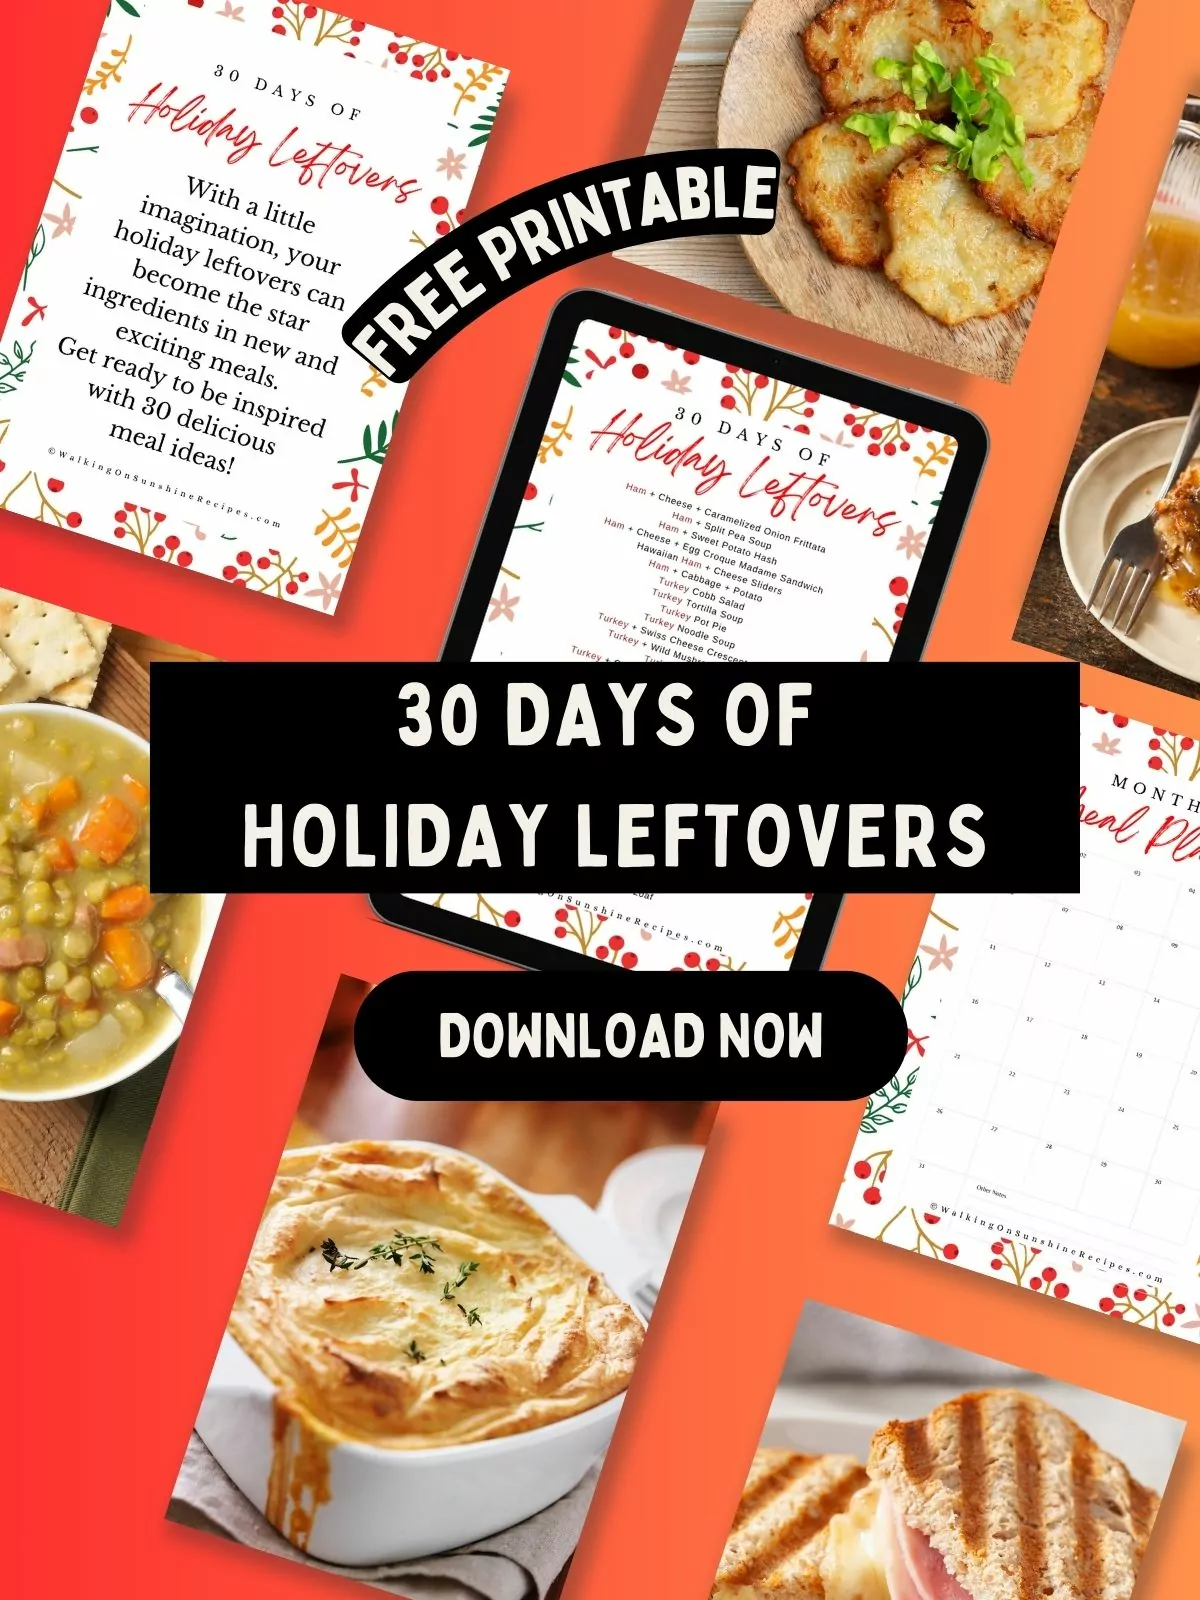 30 Days of holiday leftovers free printable.